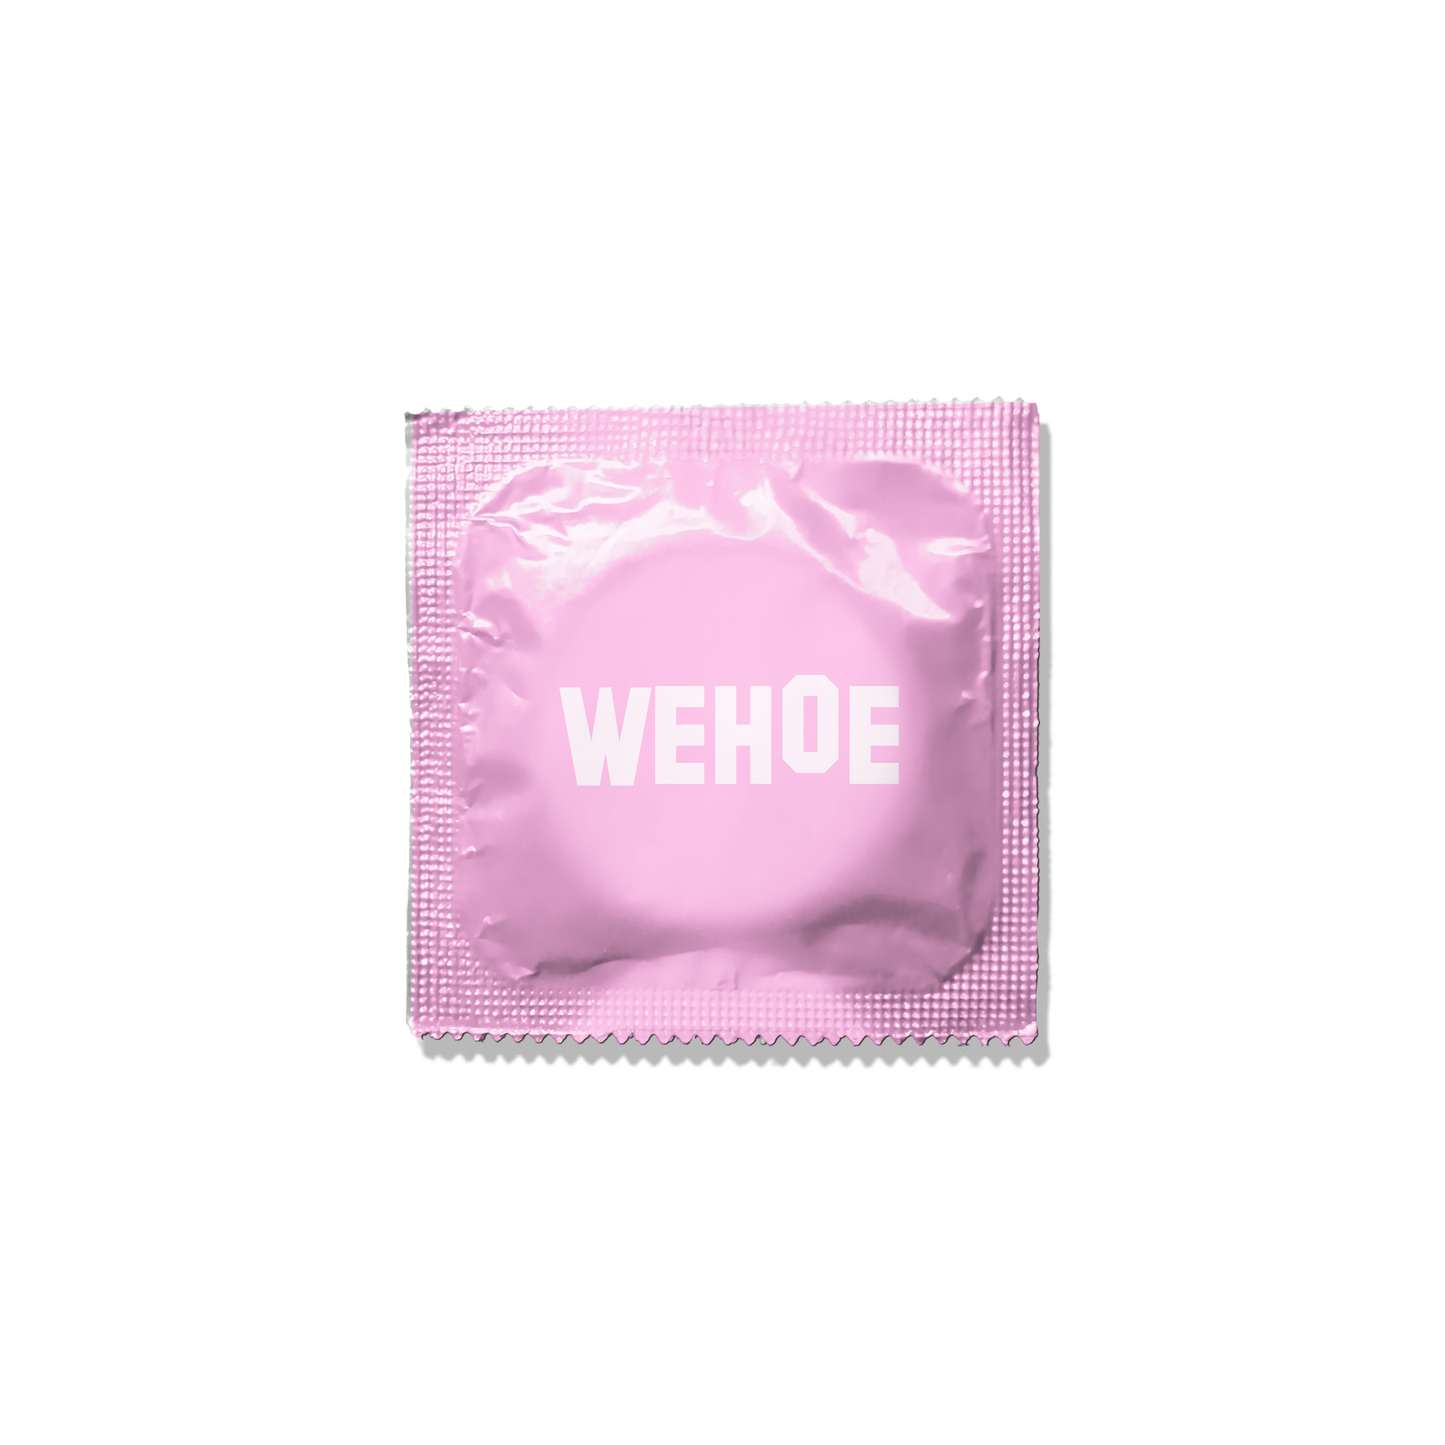 3 PACK OF WEHOE CONDOMS